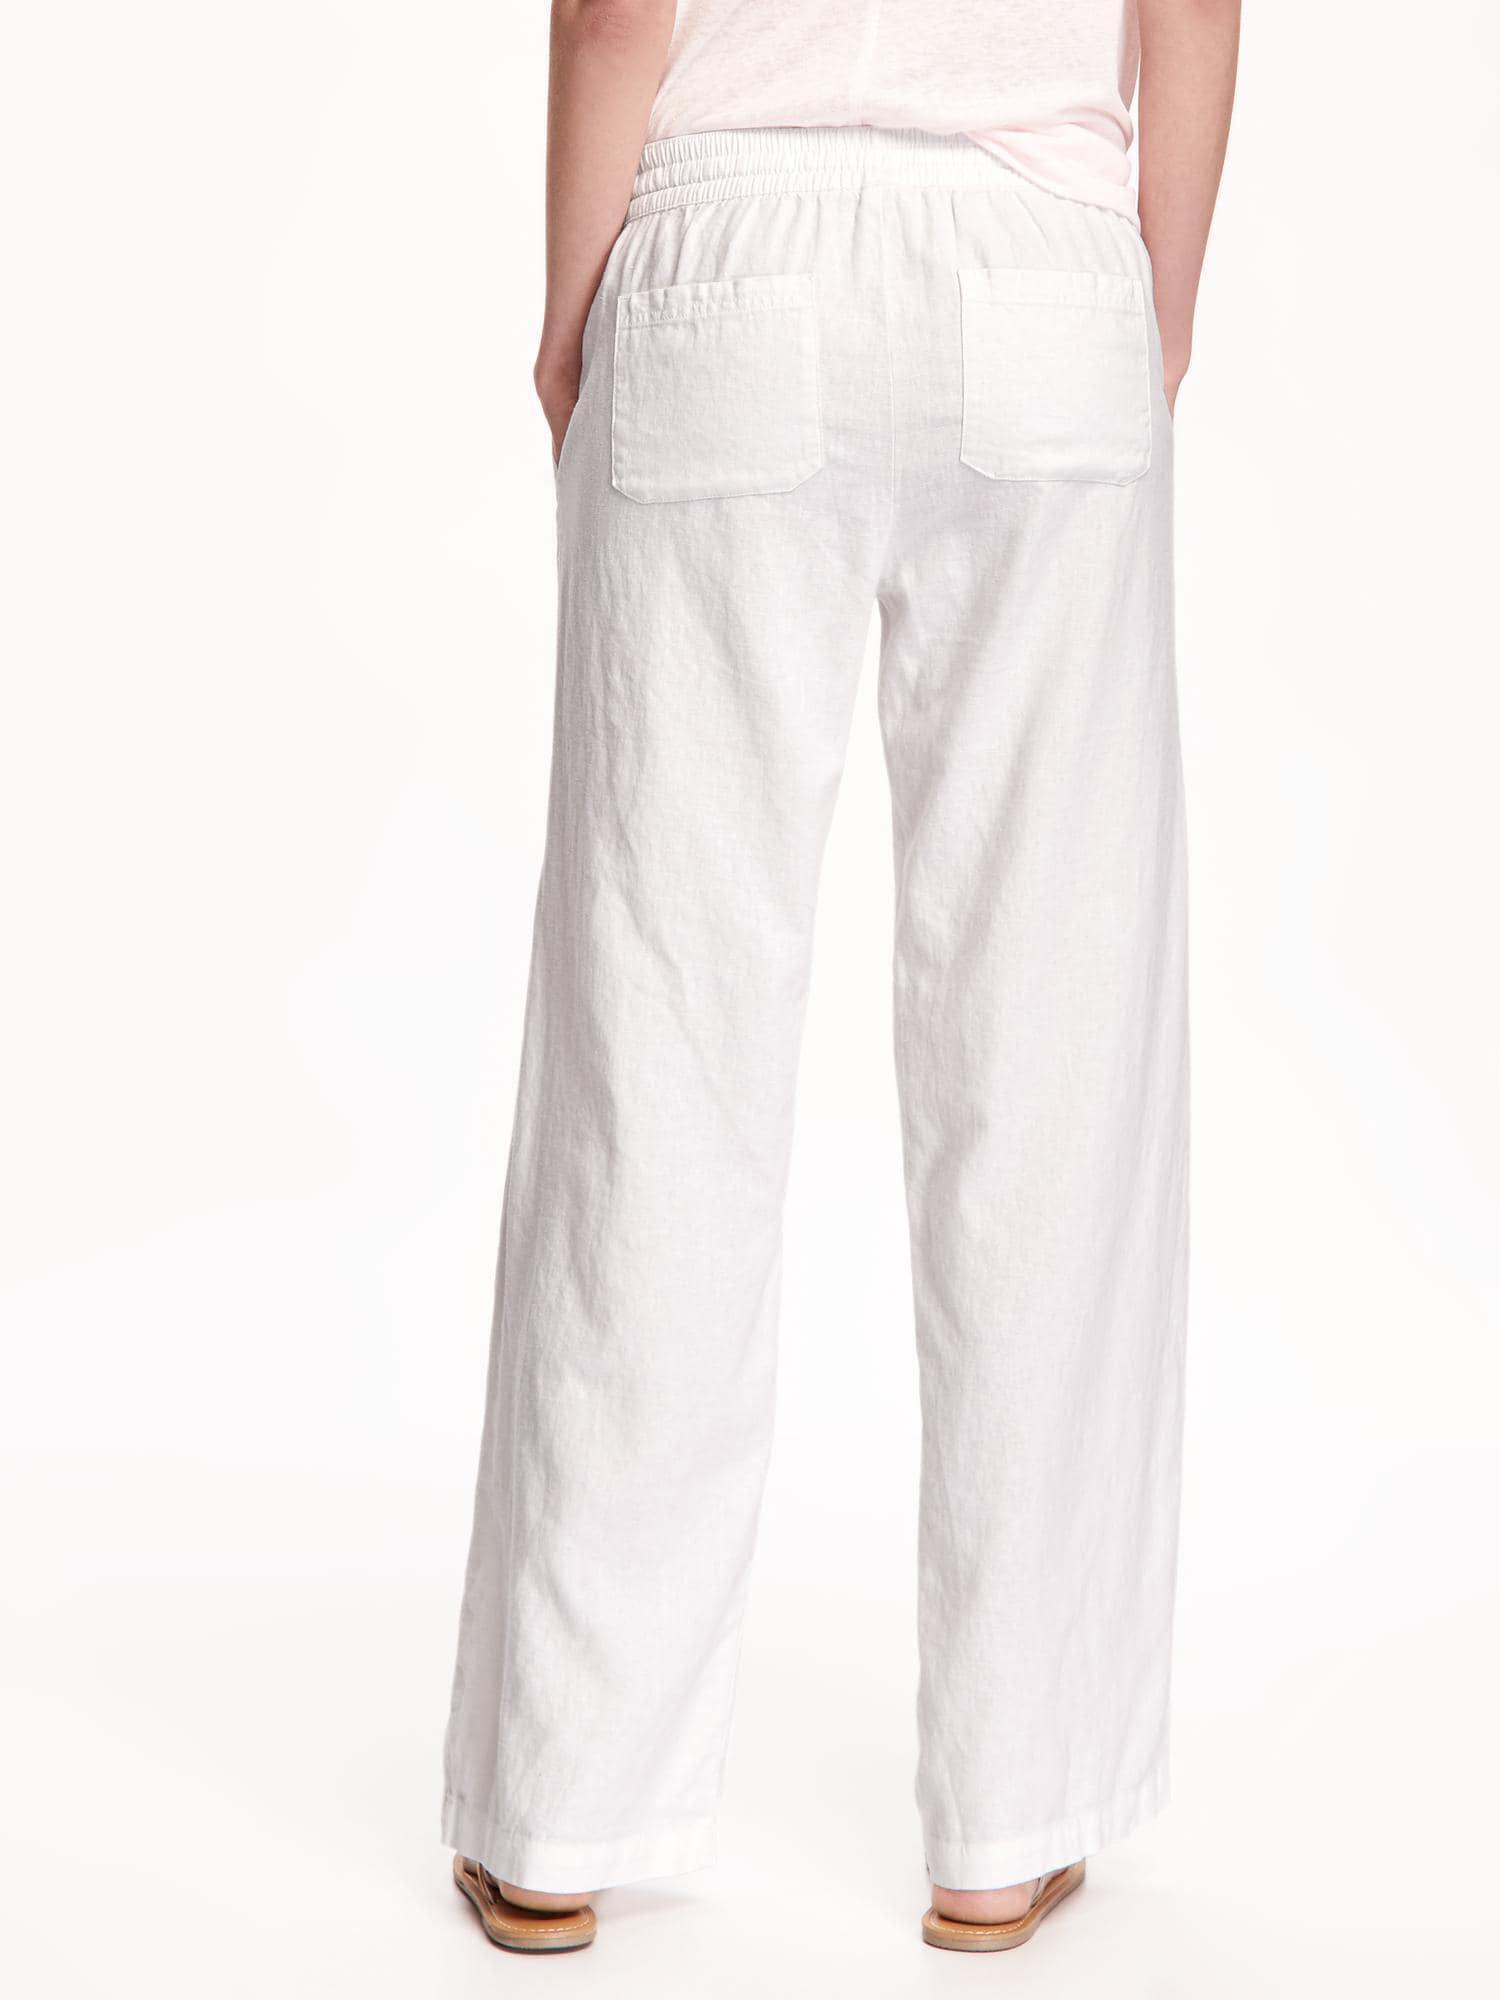 old navy womens white pants